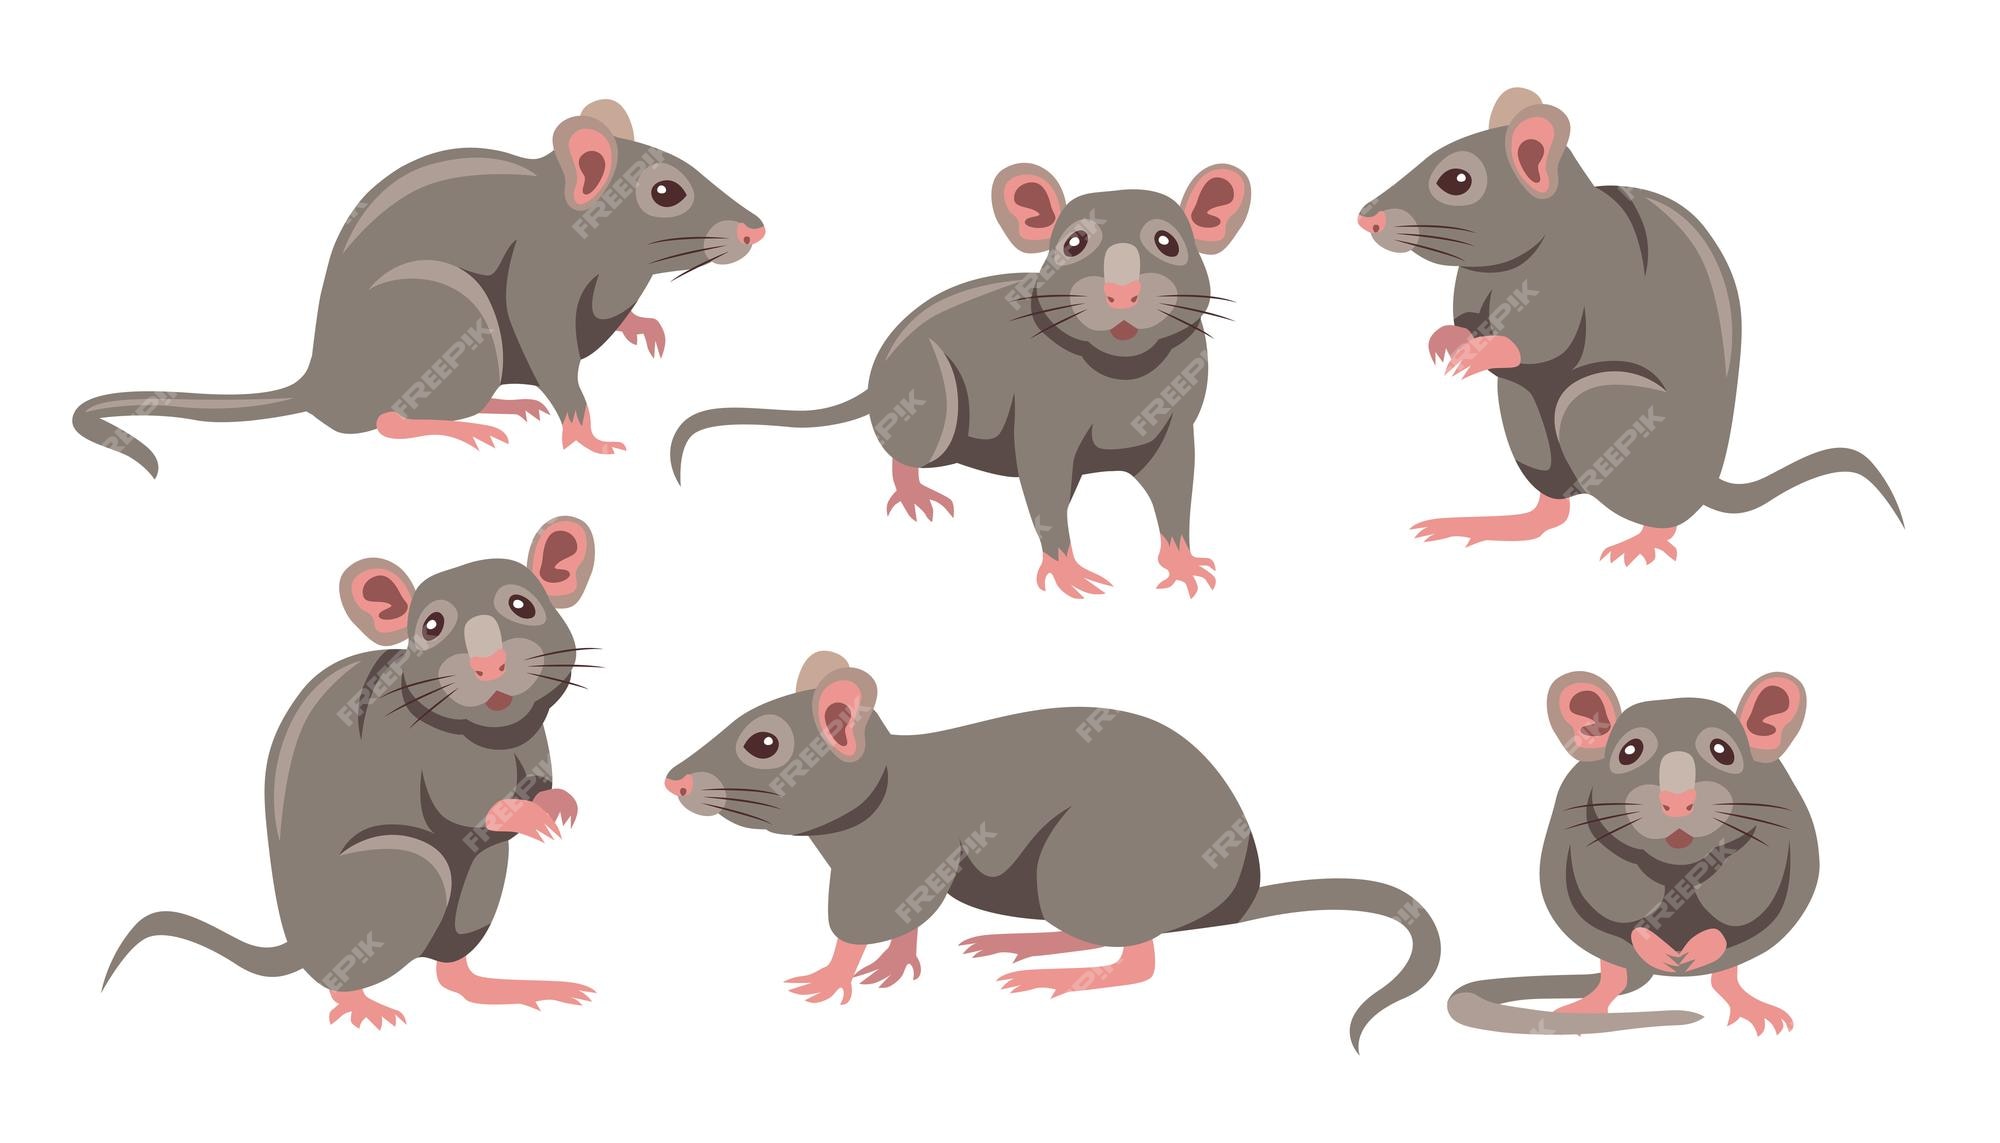 Mouse Rats Images - Free Download on Freepik